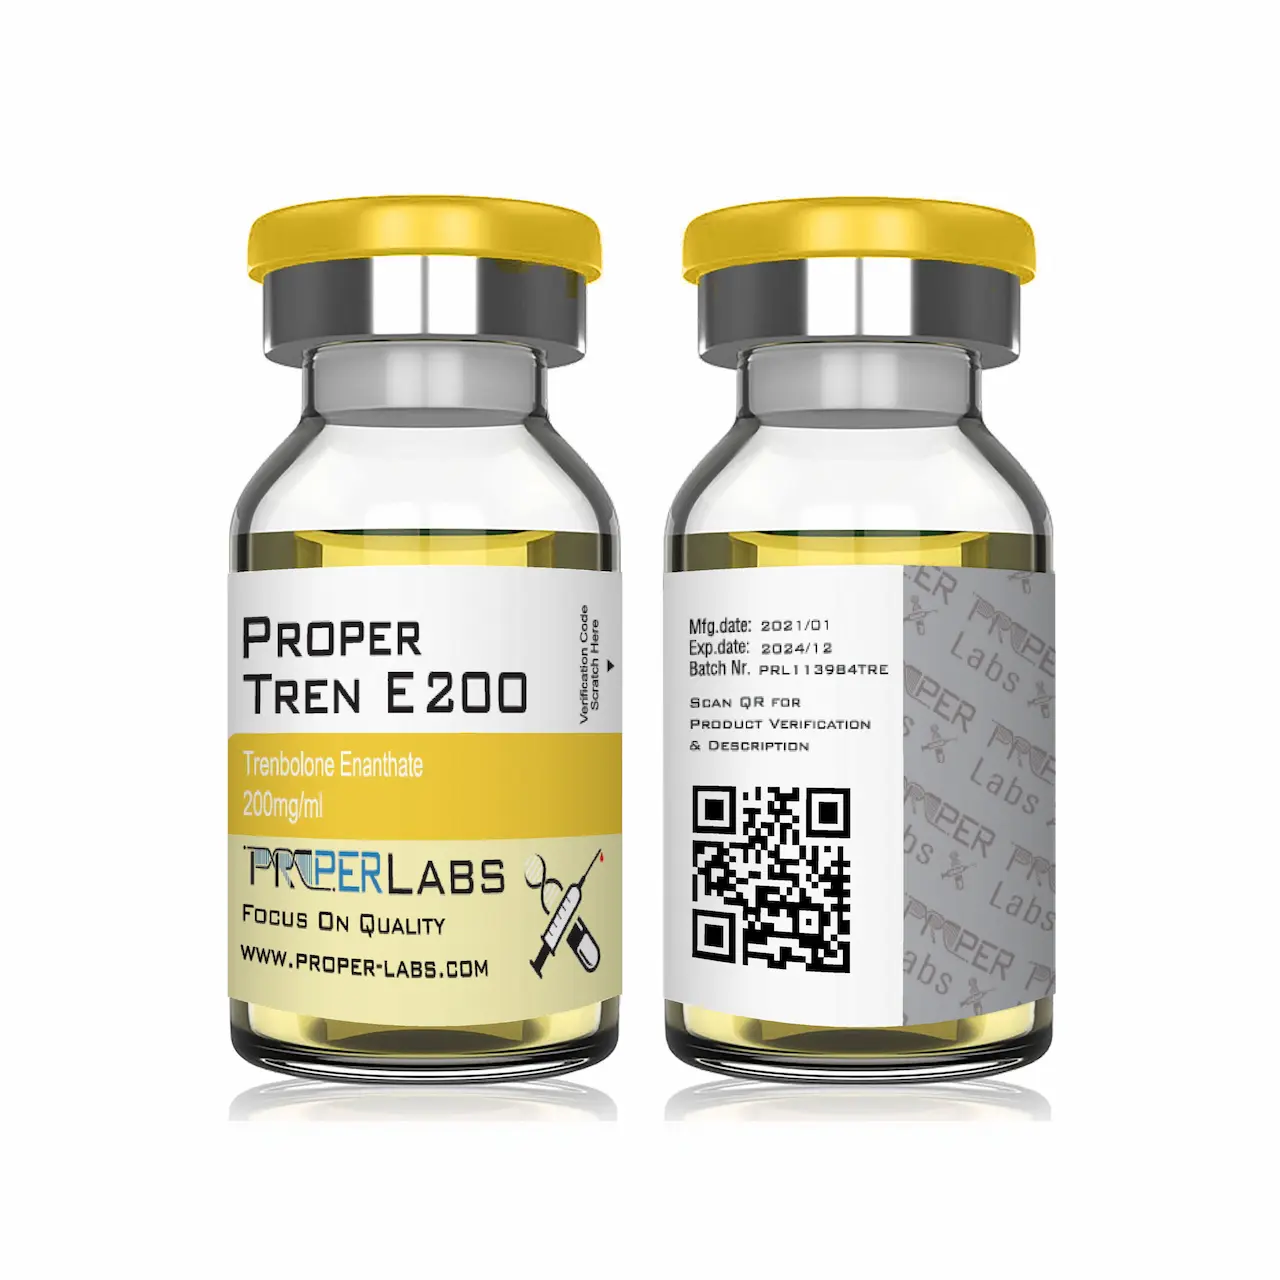 PROPER TREN E 200 scaled 1 Hexahydrobenzylcarbonate